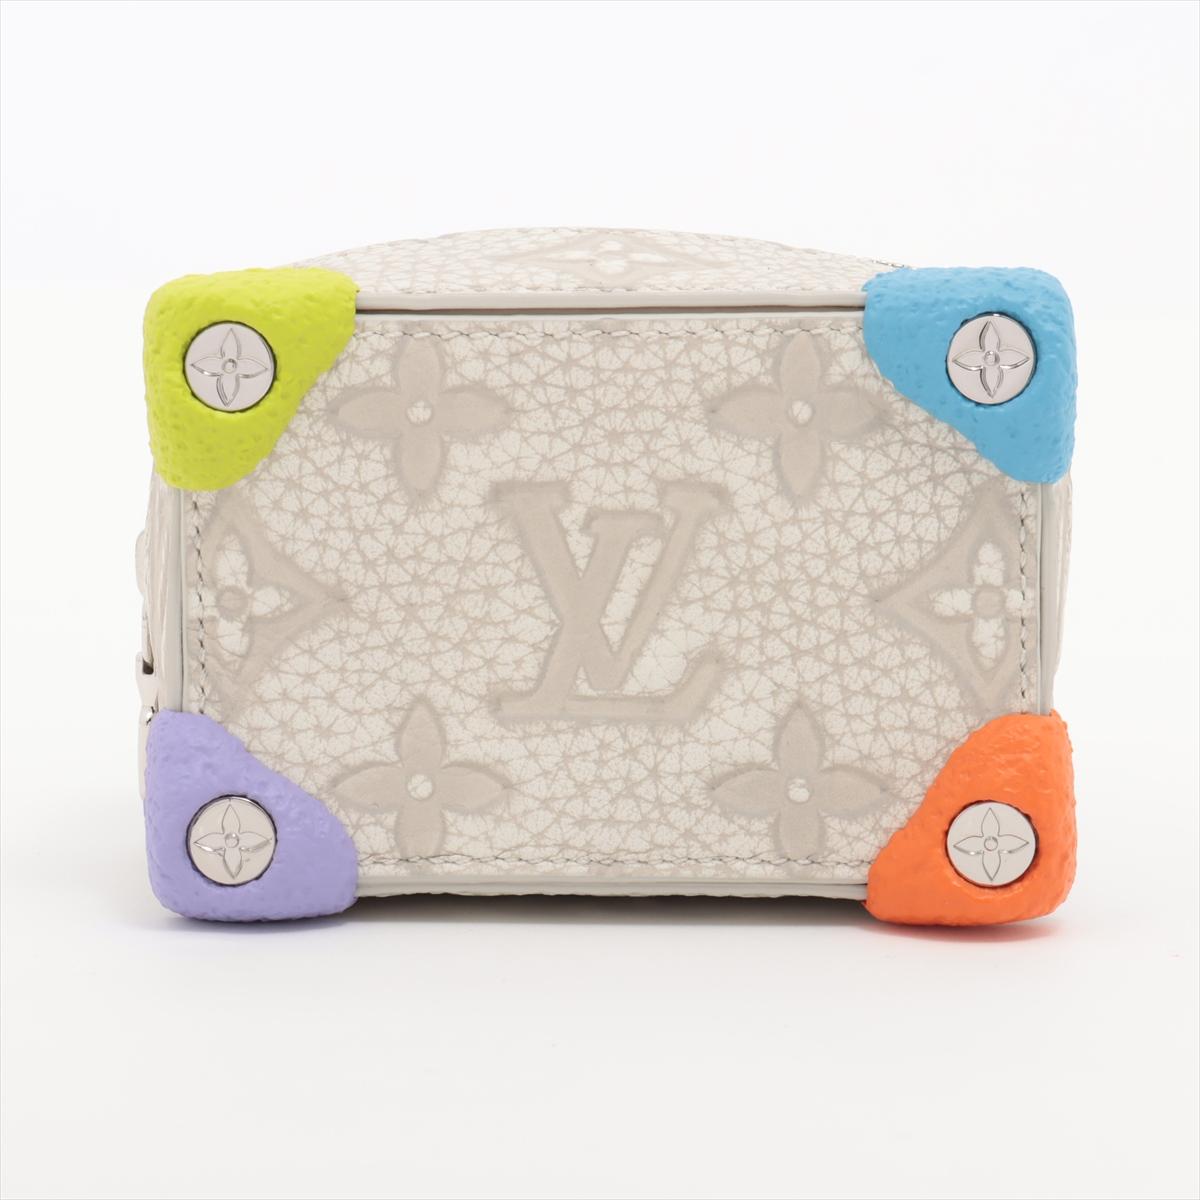 The Louis Vuitton Taurillon Monogram Climbing Pouch Bag Charm in Off-White is a captivating and versatile accessory that adds a playful touch to any Louis Vuitton bag. Crafted from supple Taurillon leather, the pouch features the iconic Monogram